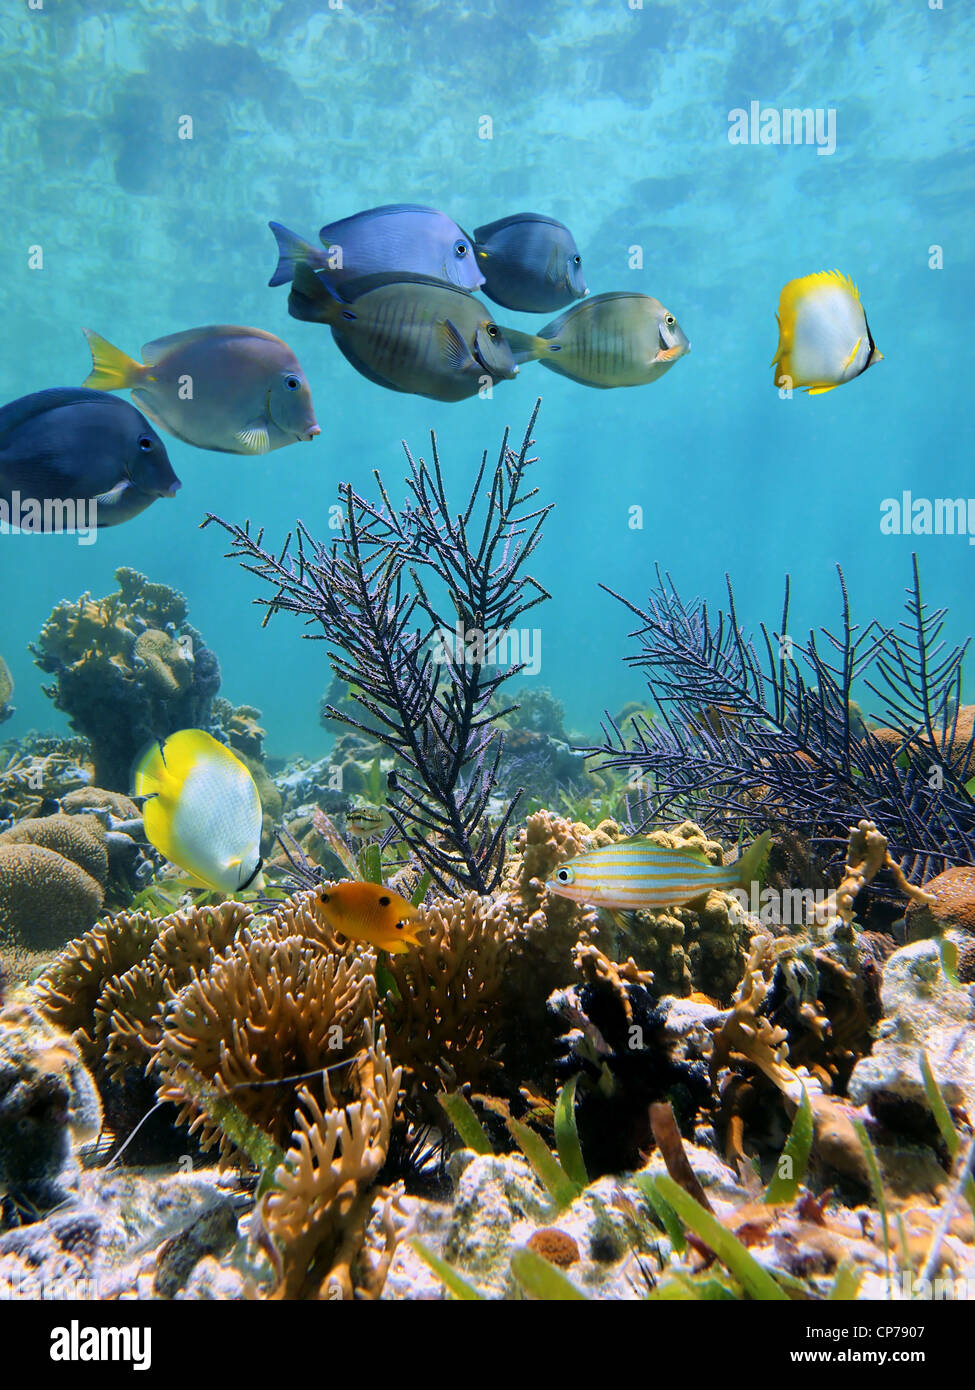 Underwater coral reef with tropical fish on shallow seabed, Caribbean sea, Mexico Stock Photo